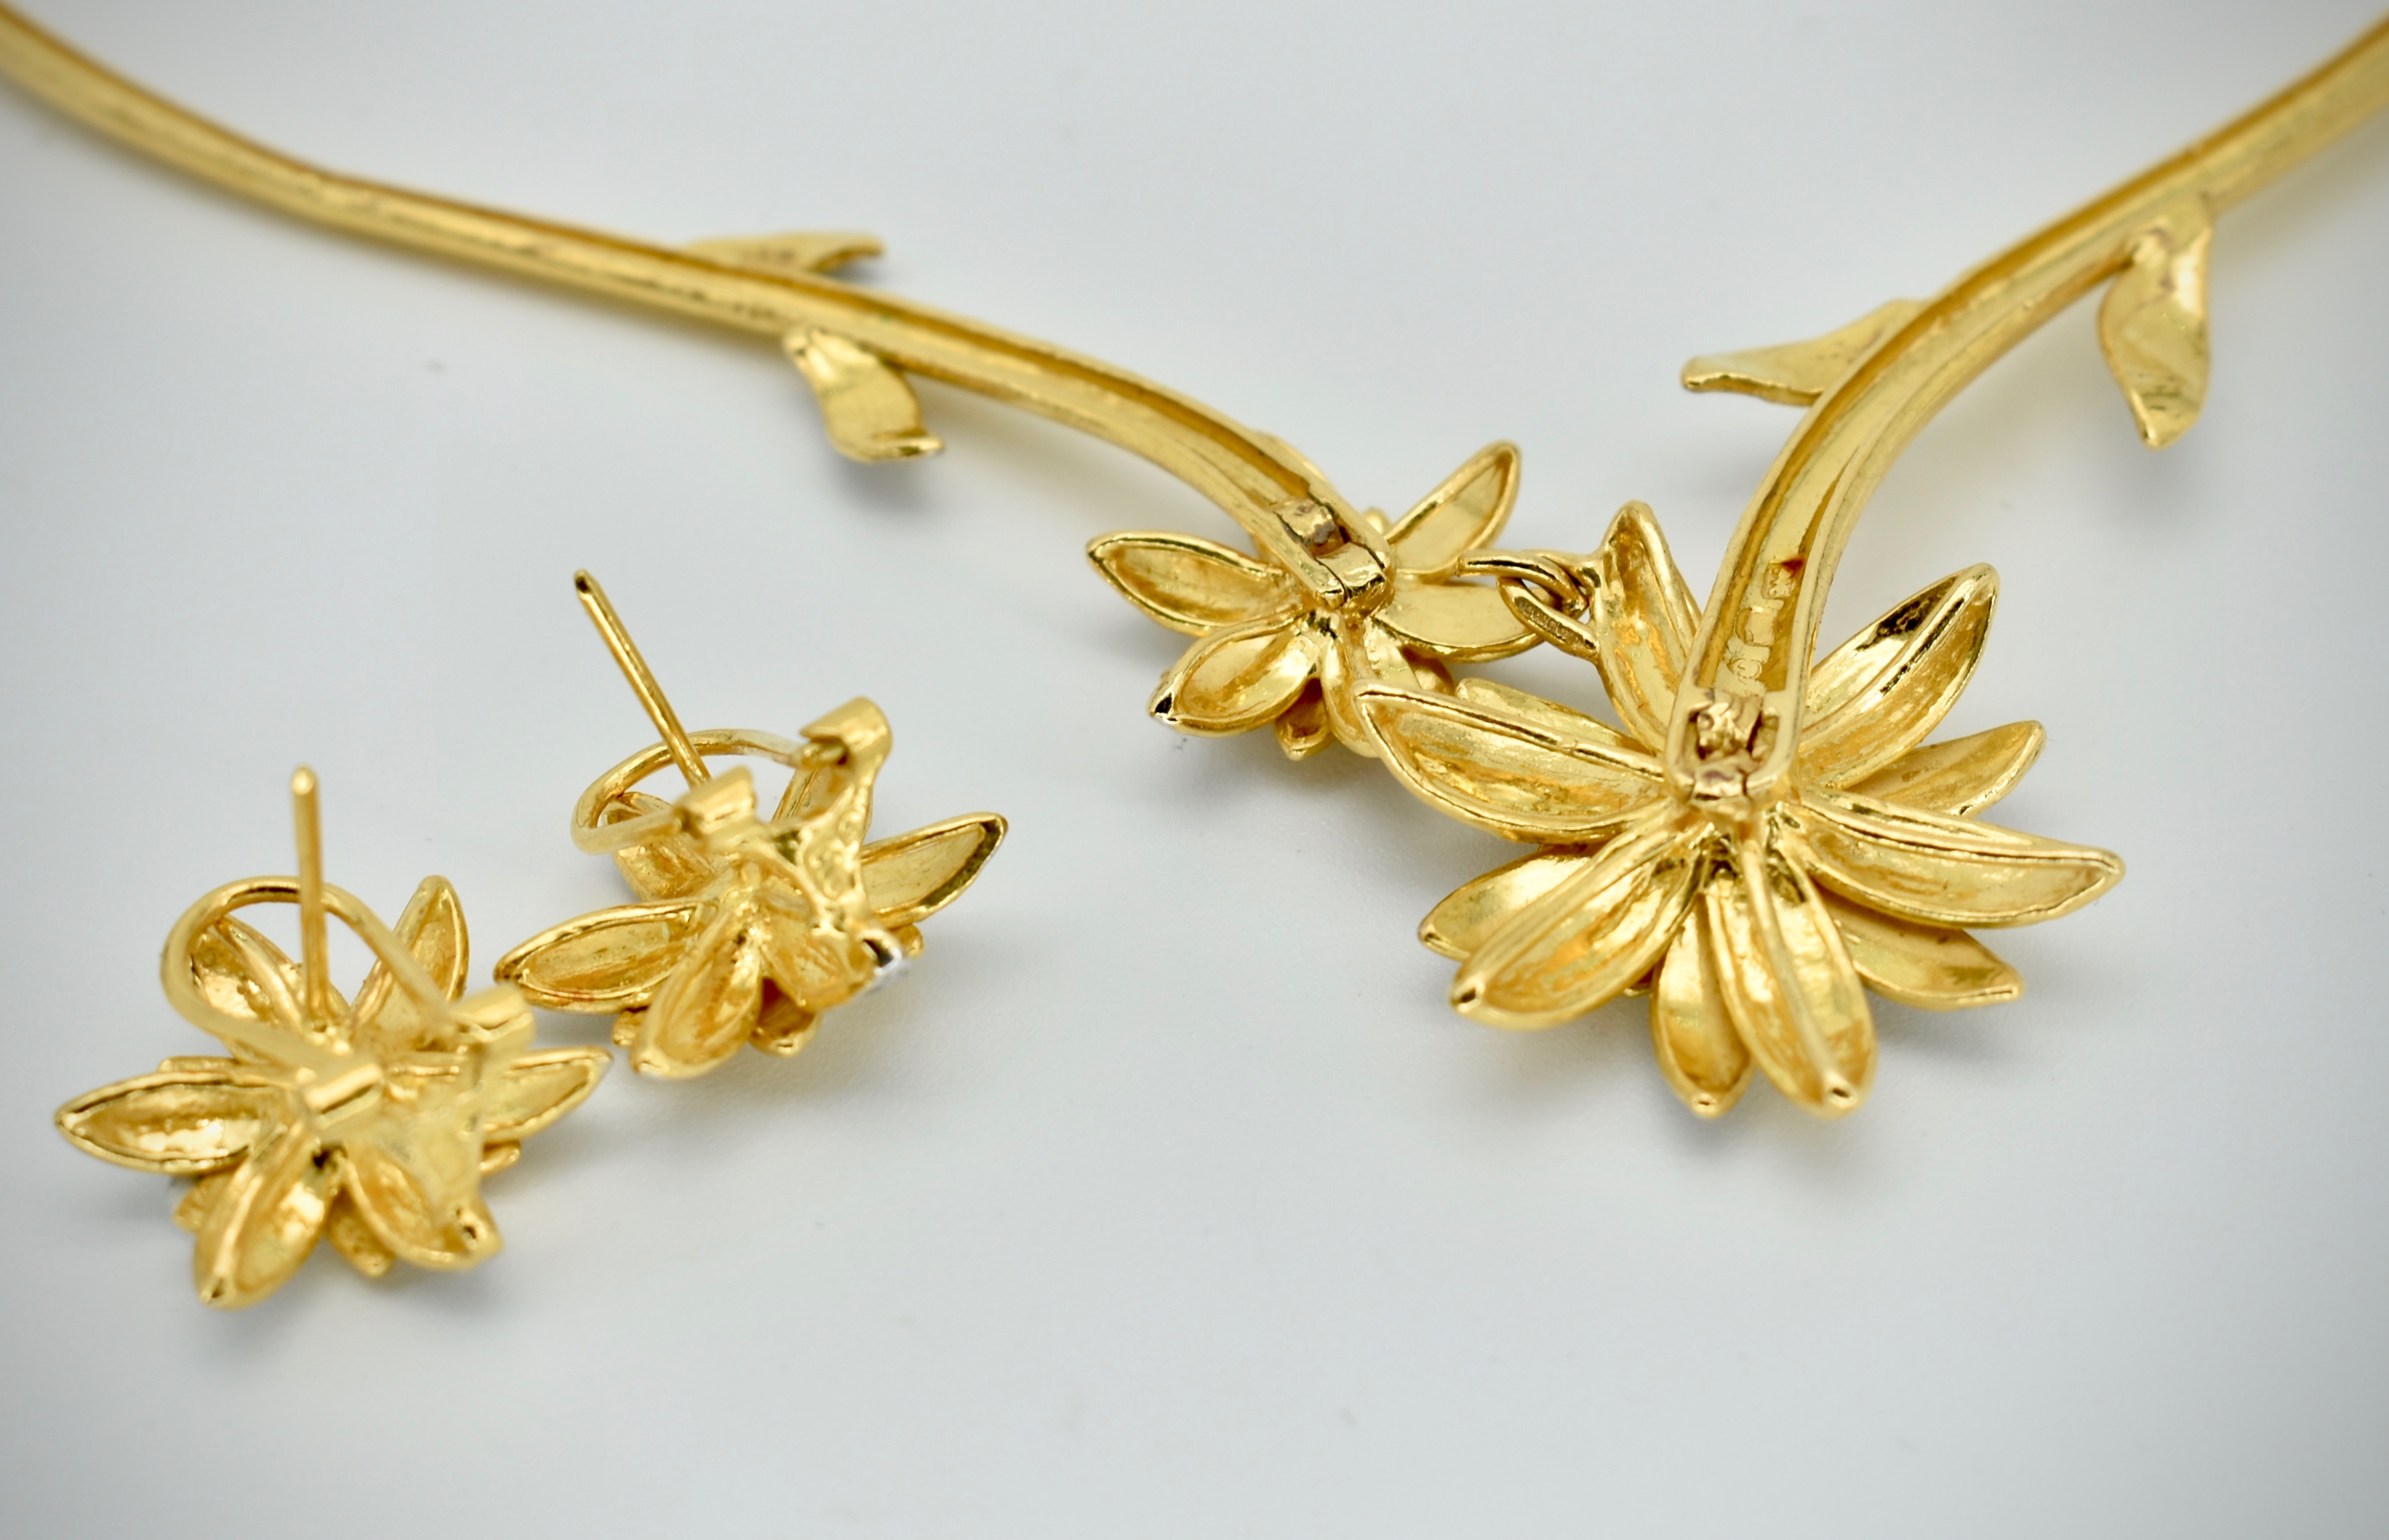 22ct Gold Hallmarked Collar Necklace & Earrings Suite - Parure - Image 3 of 3